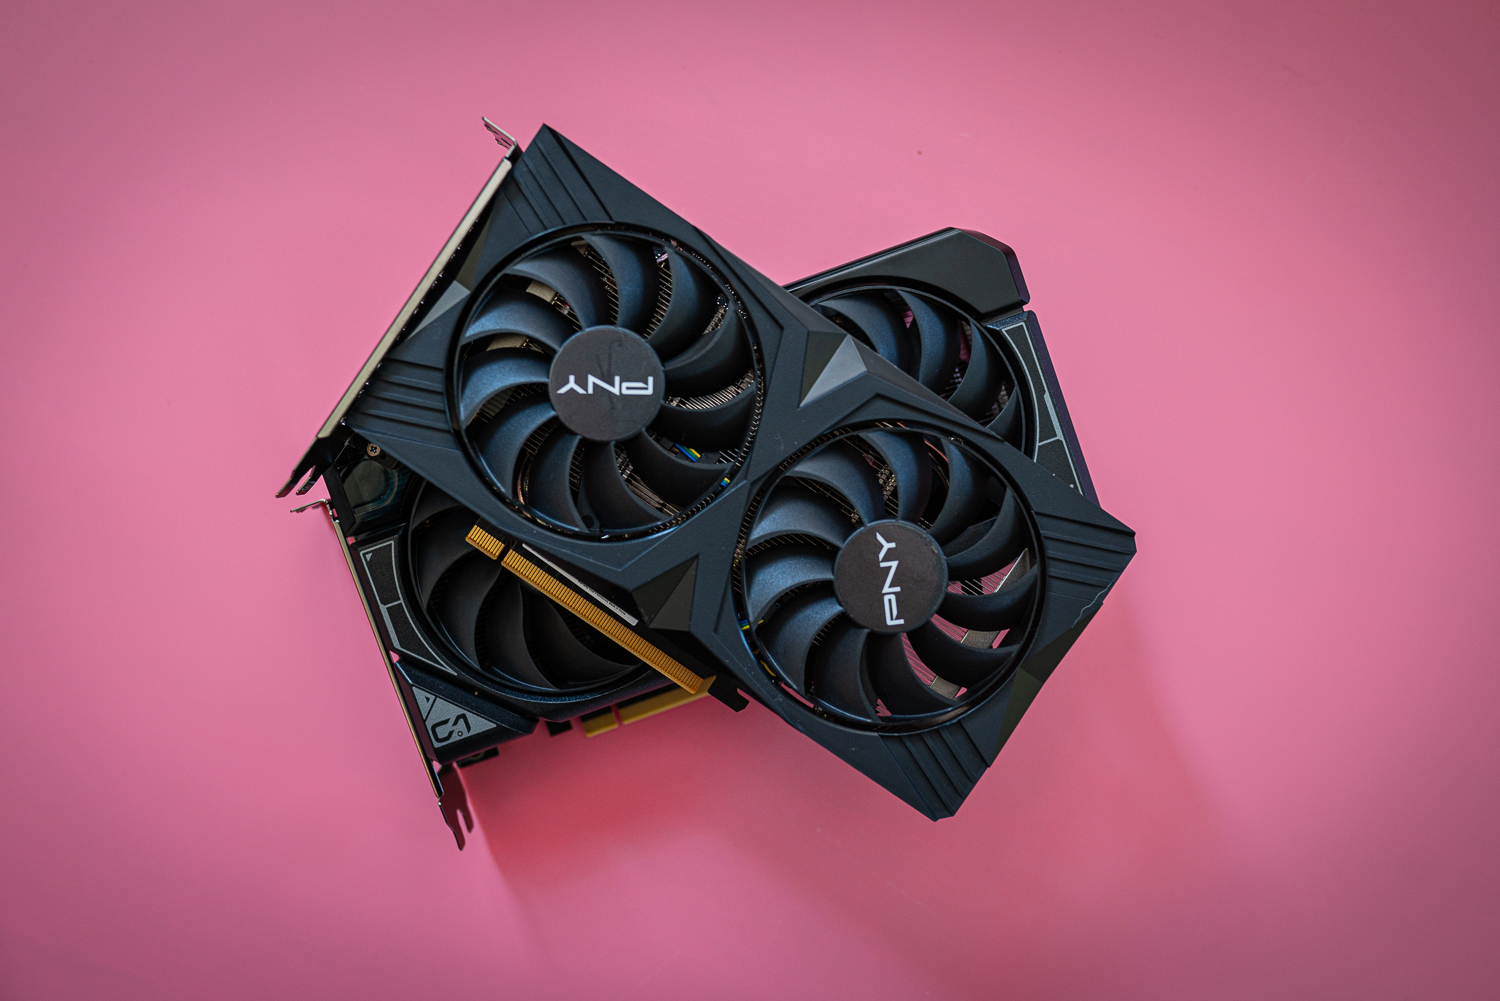 Colorful rtx 4060 nb duo